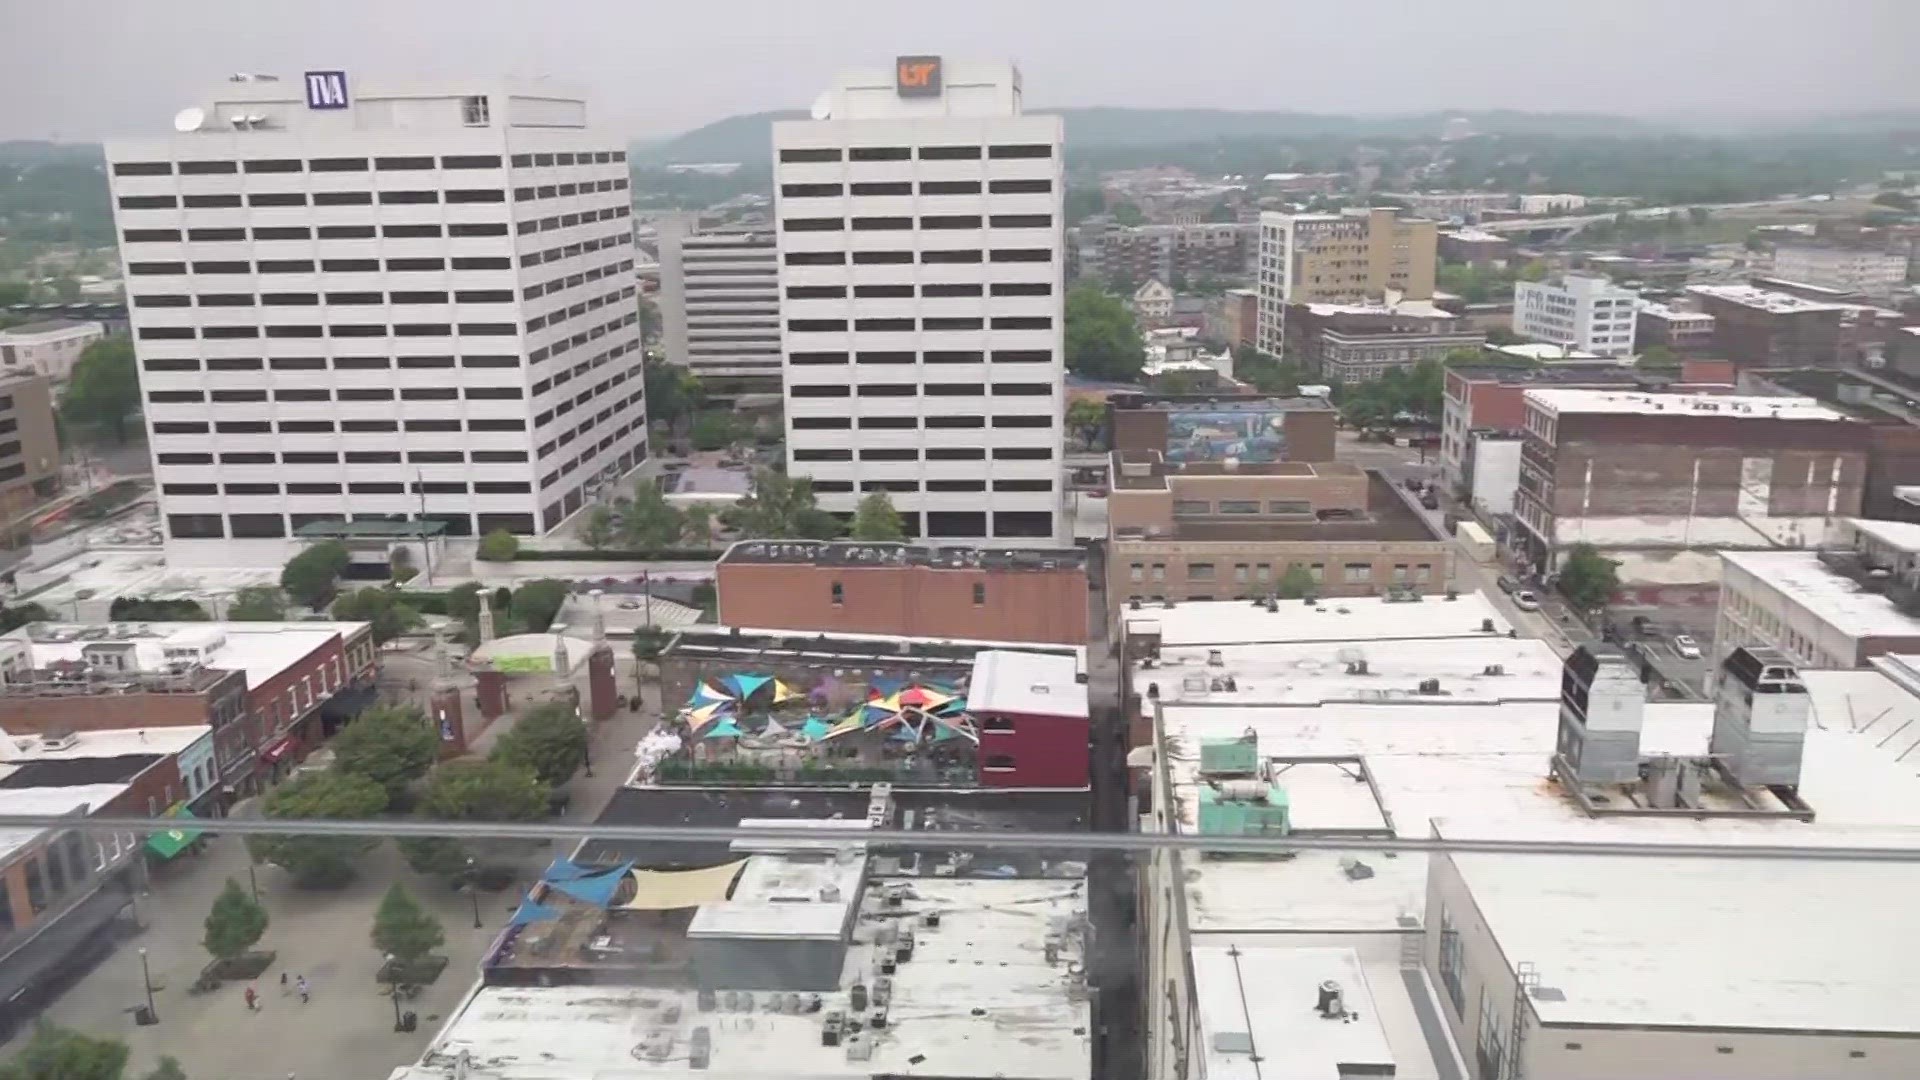 On top of the Embassy Suites rooftop, Katie Inman gives ideas on how you can have fun in downtown Knoxville.